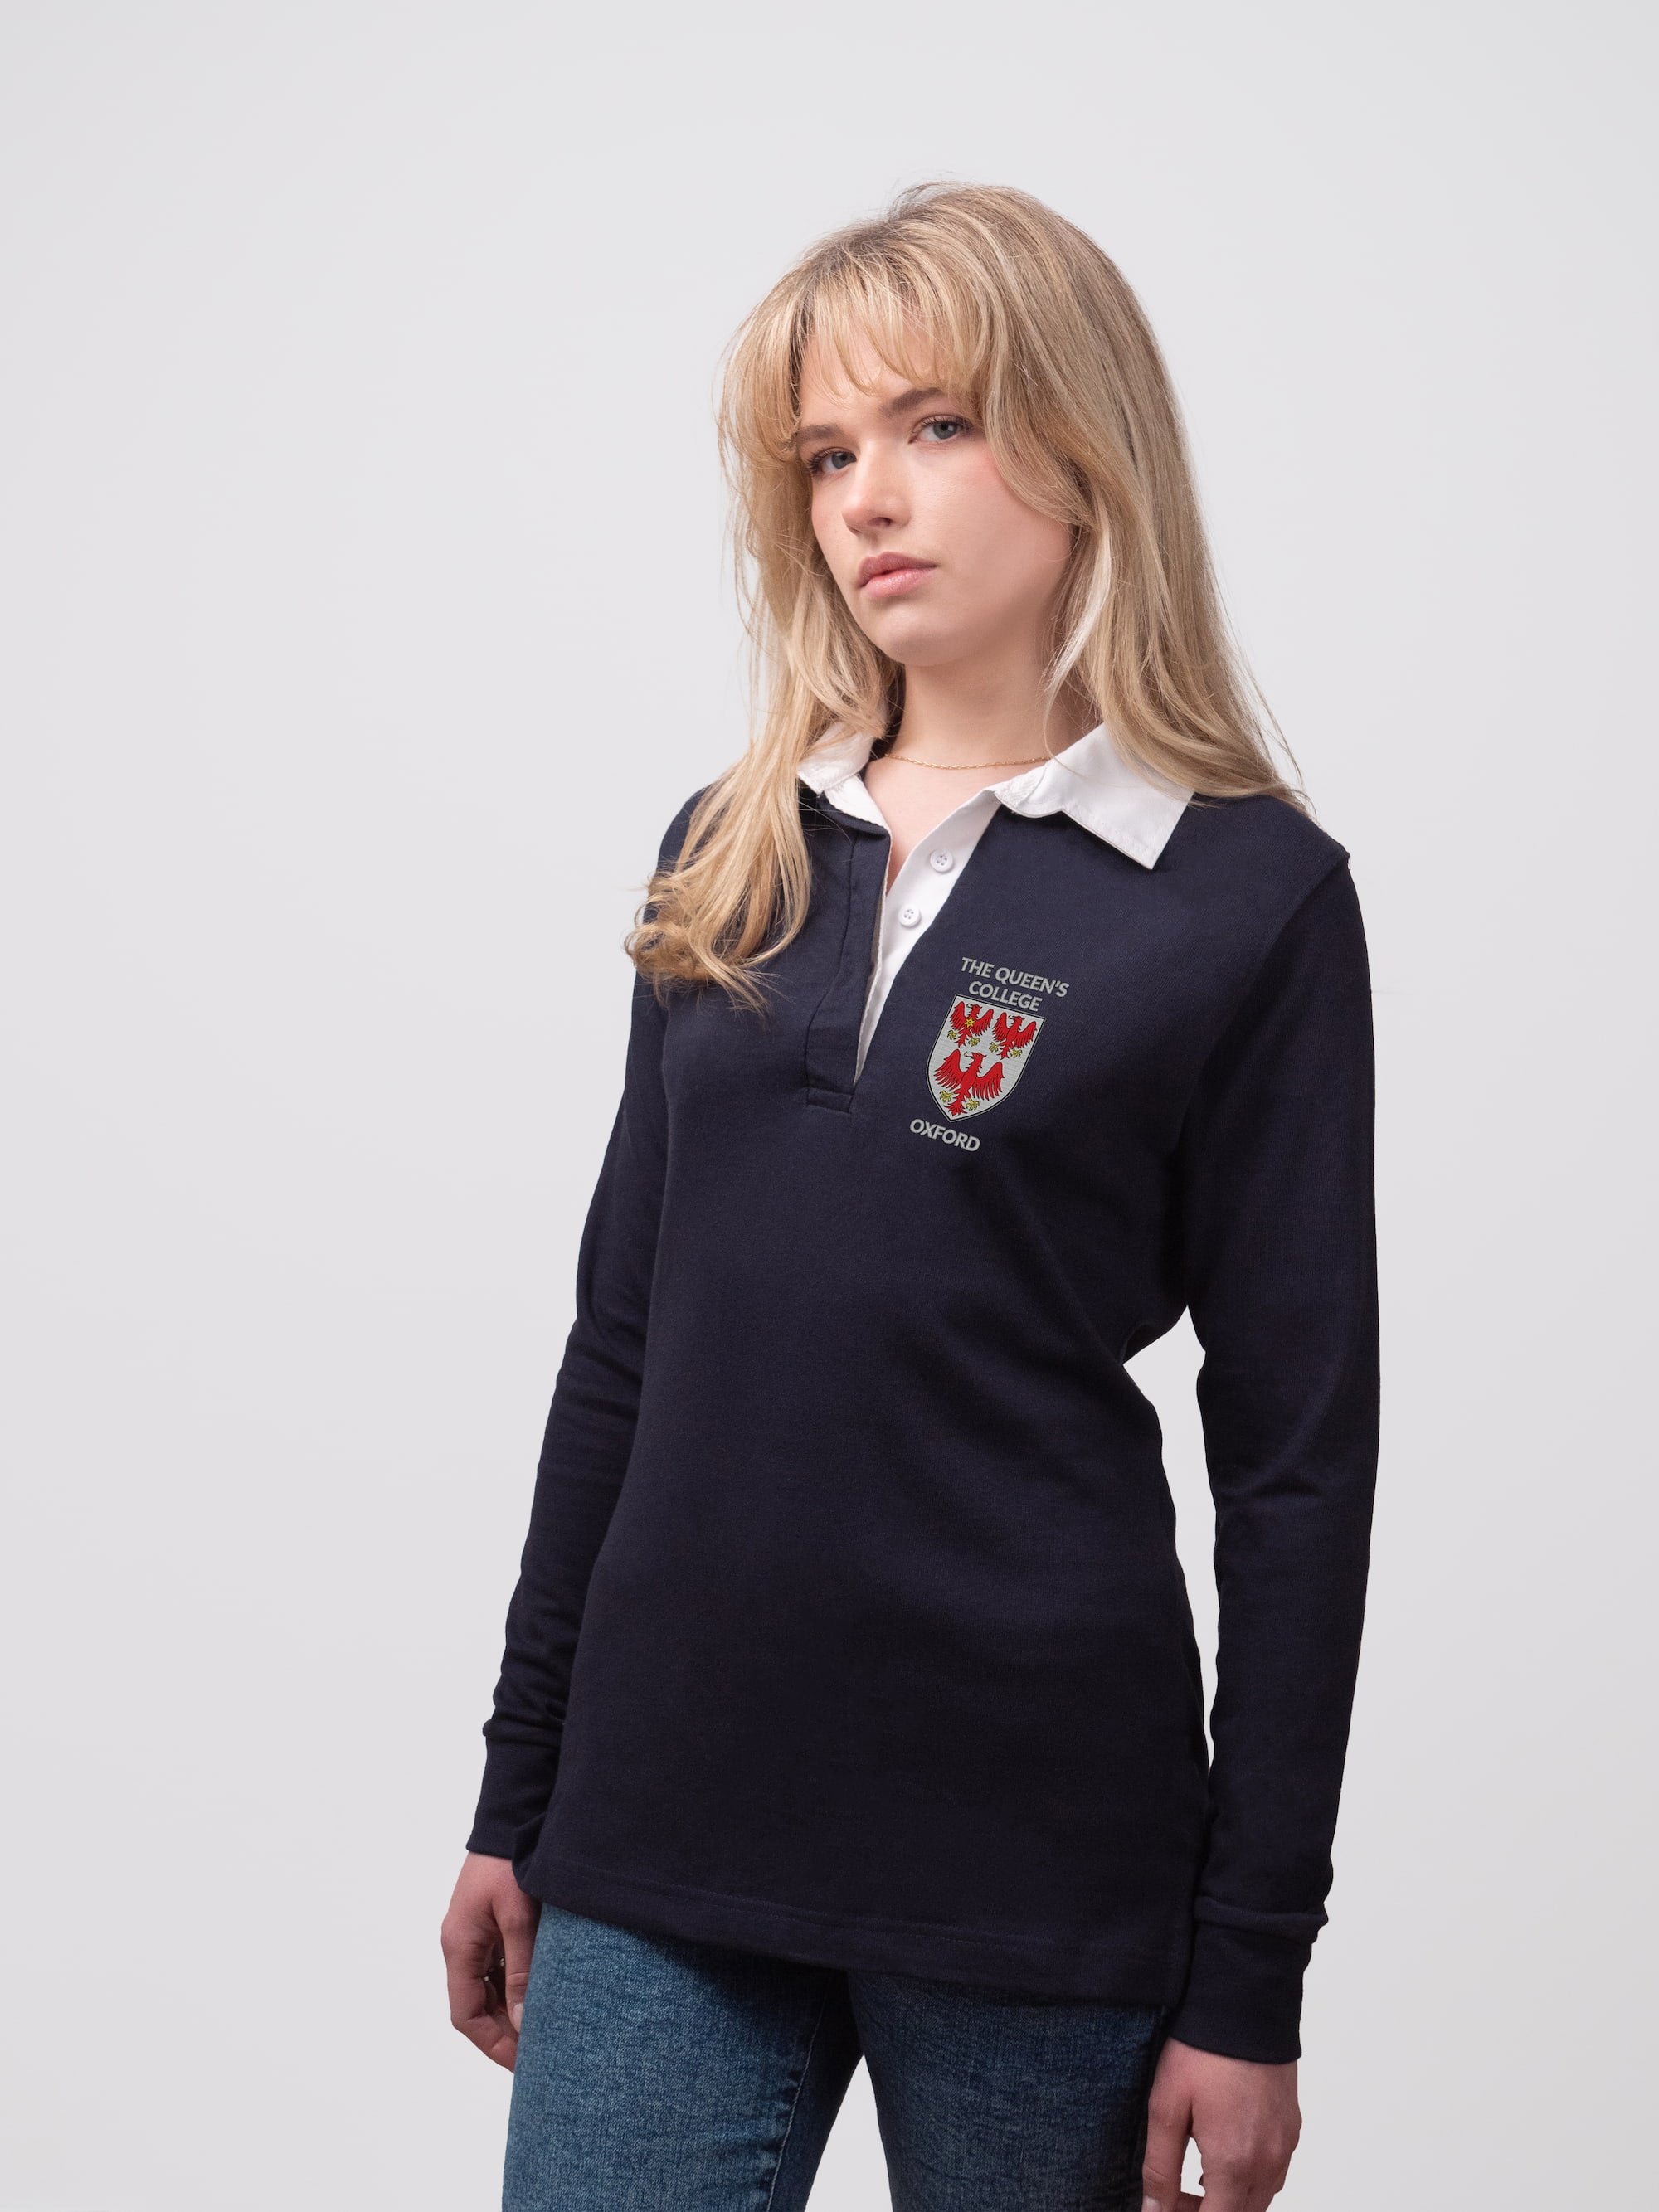 Student wearing a navy The Queen's College rugby shirt with embroidered crest